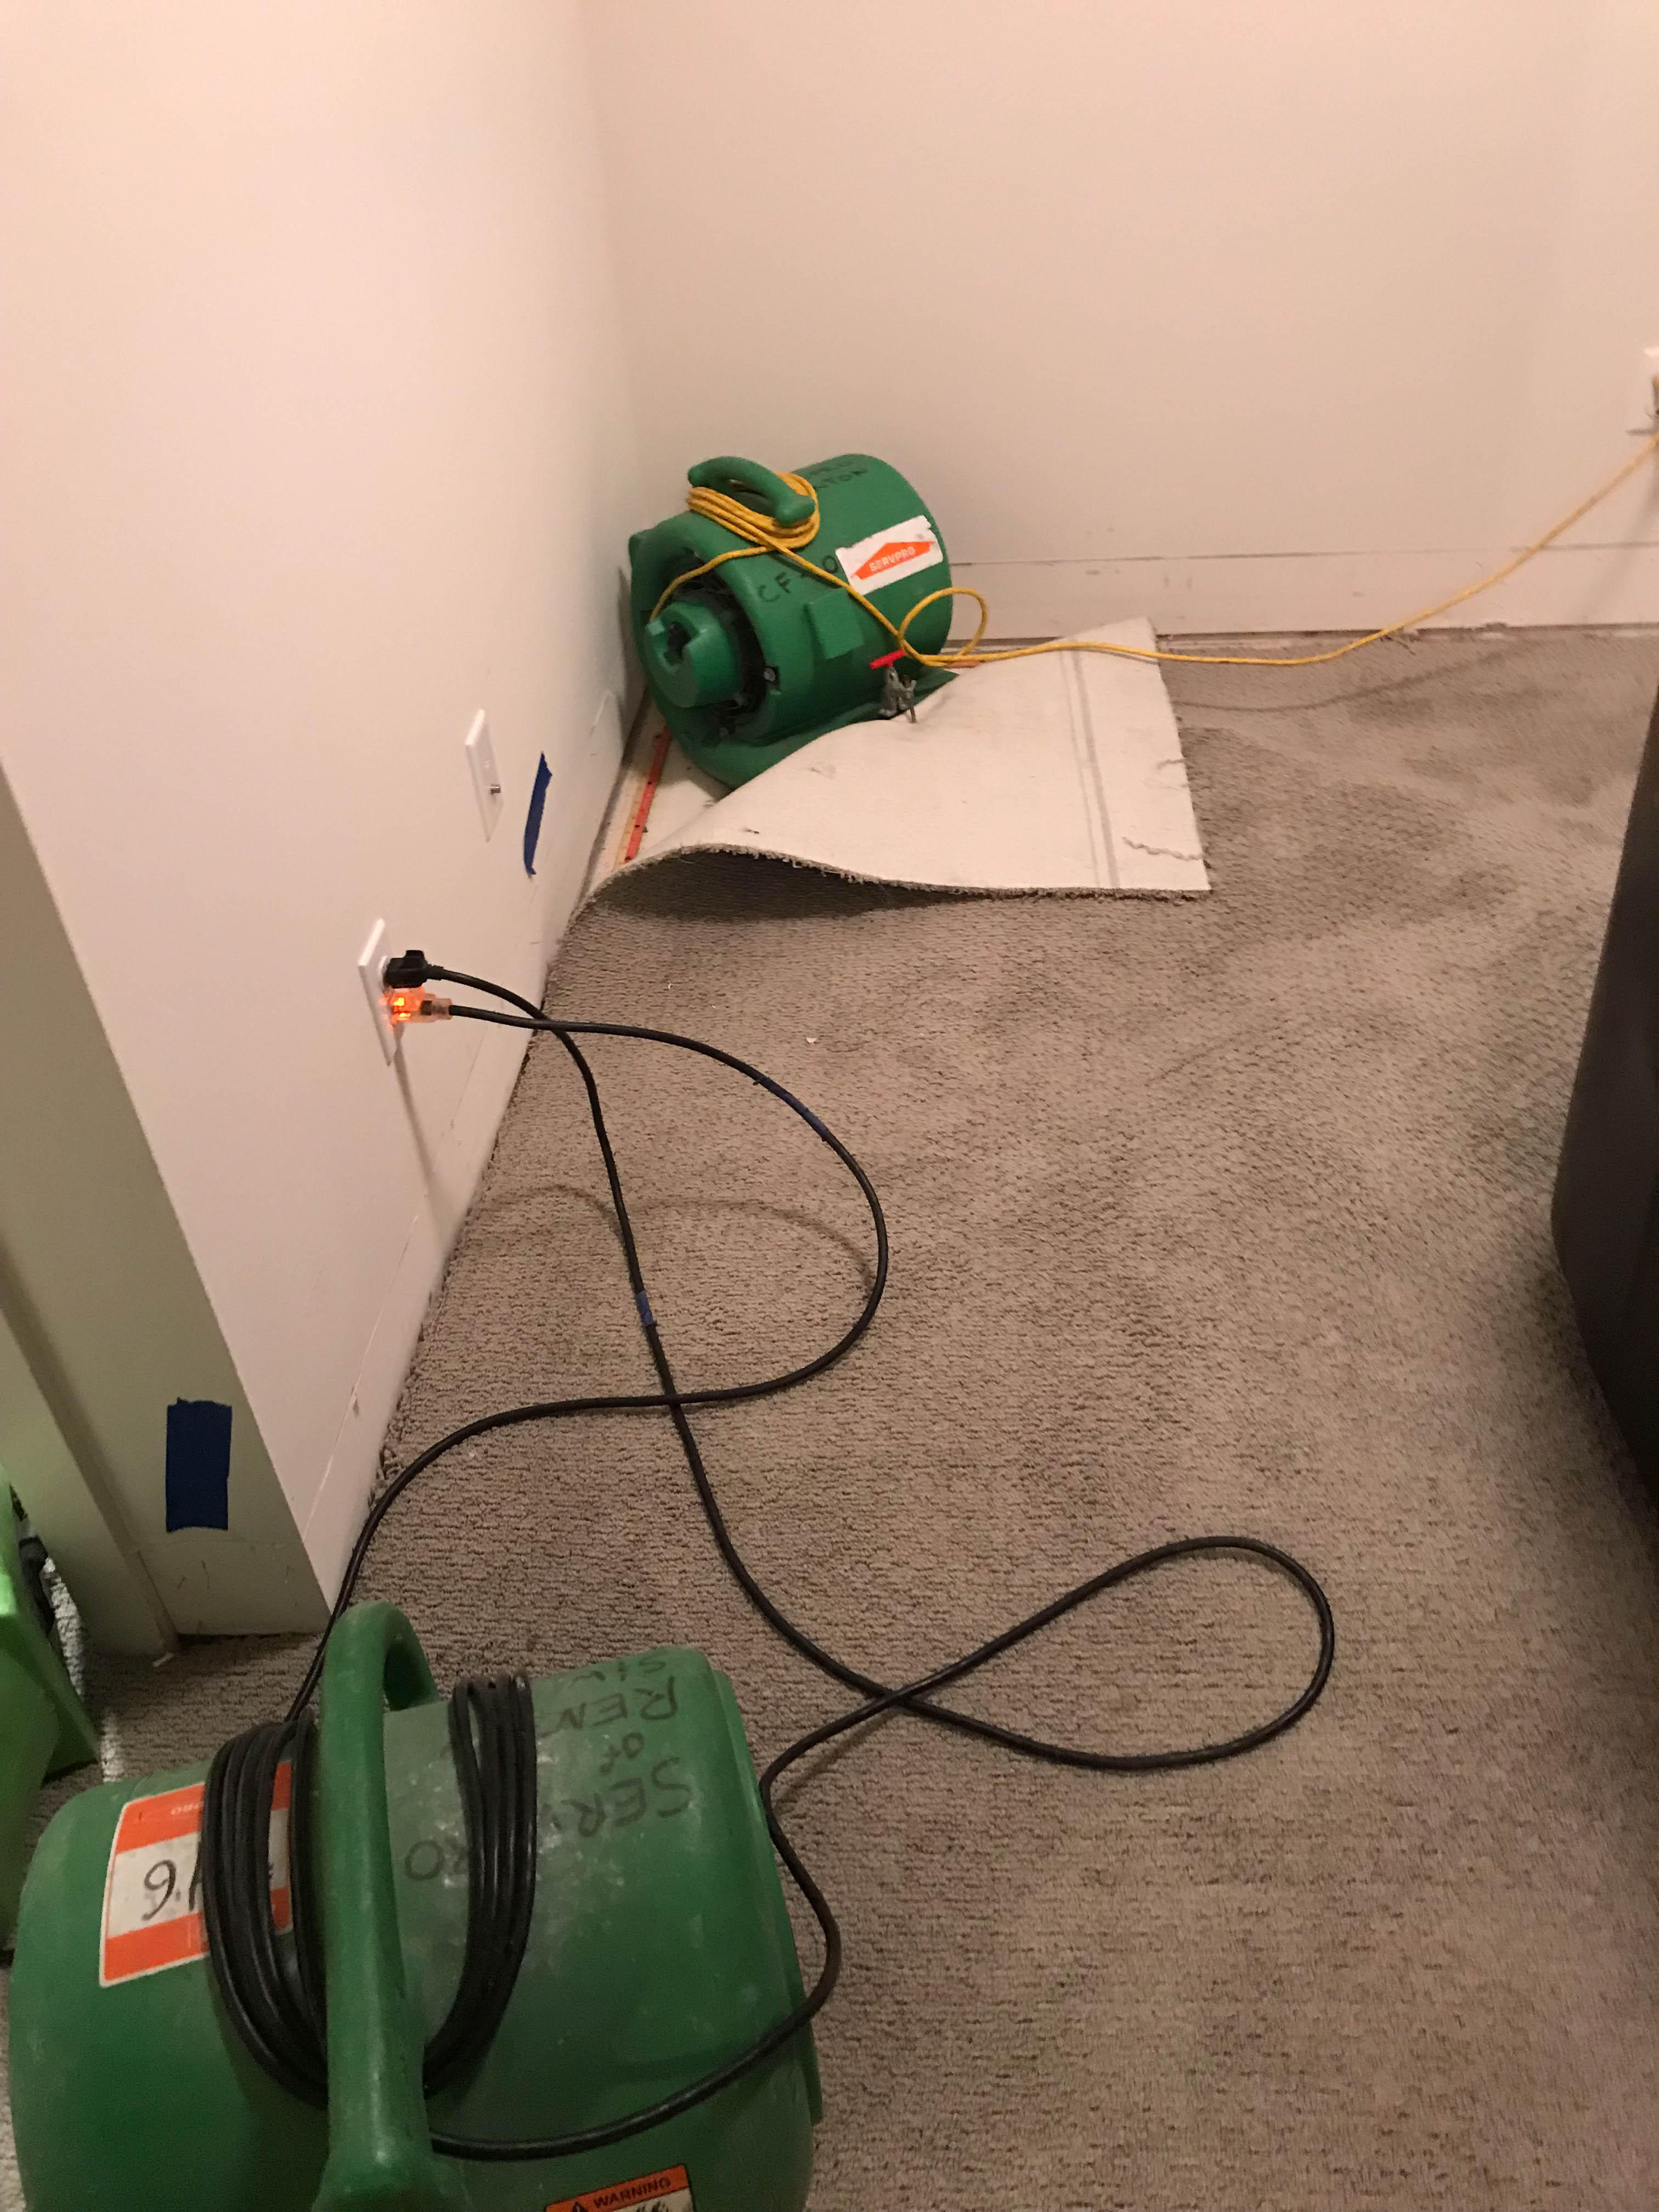 SERVPRO of Issaquah/North Bend is ready for your call! We are happy to help with any and all water damage jobs you can throw our way.